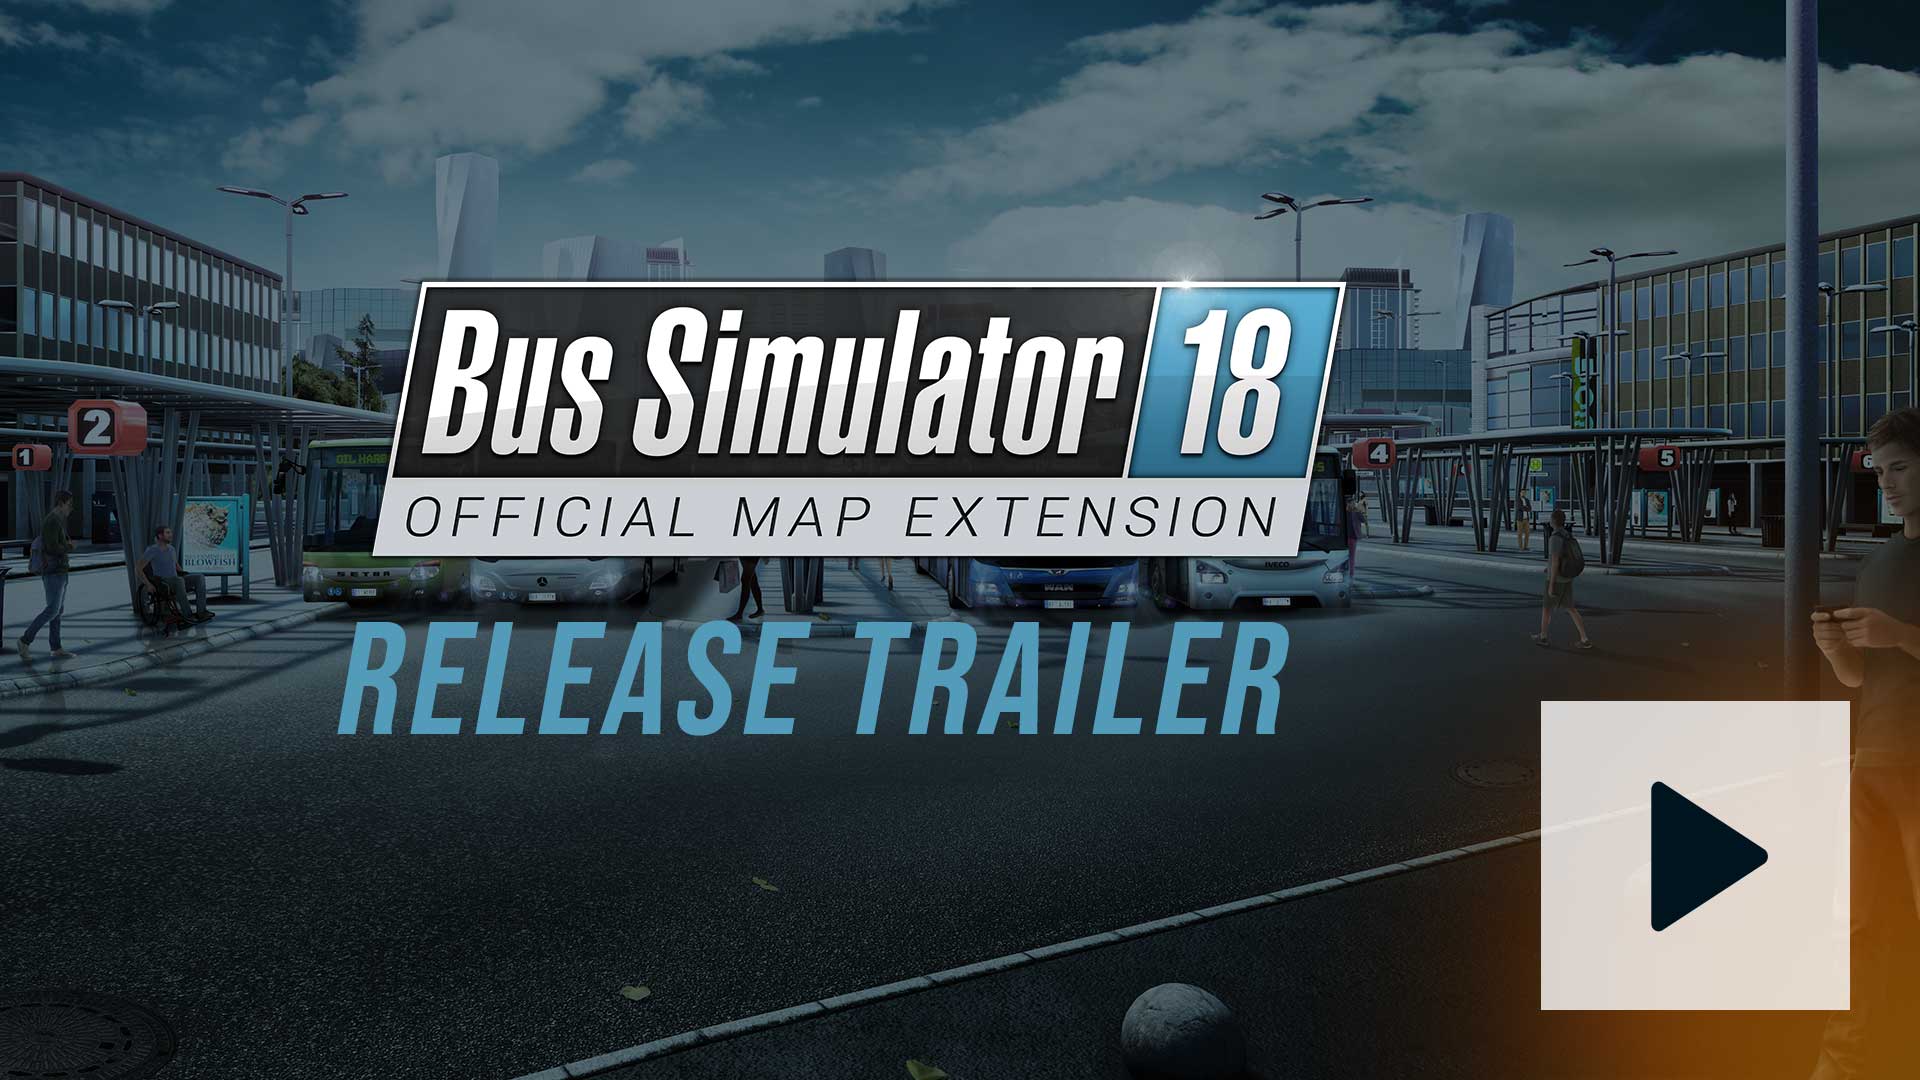 Bus Simulator 18 - Official Map Extension Trailer